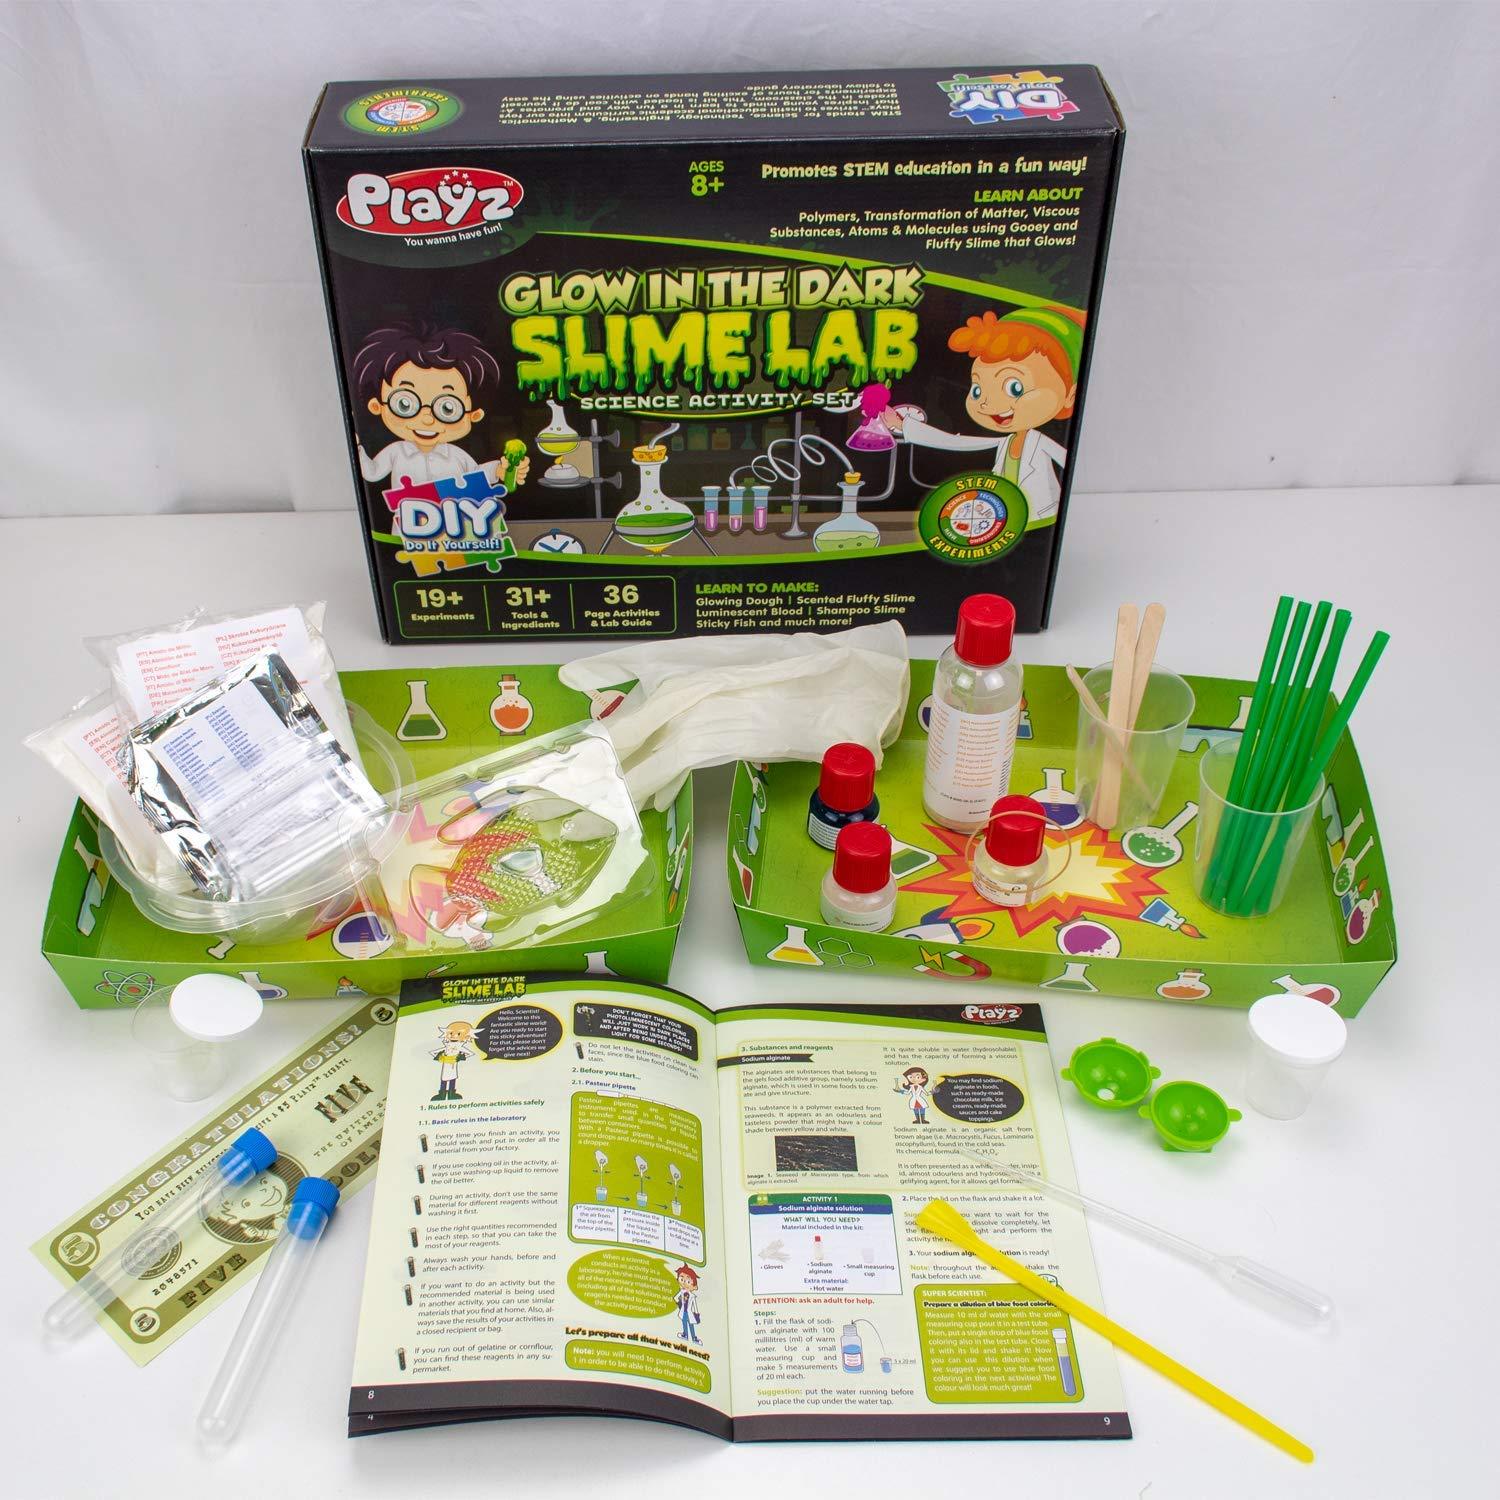 Playz Glow in The Dark Slime Lab Science Kit w/ 19+ Experiments to Make Glowing Dough, Scented Fluffy Slime, Luminescent Blood, Shampoo Slime, &amp; Sticky Fish Through Gooey Science Activ - image 3 of 7